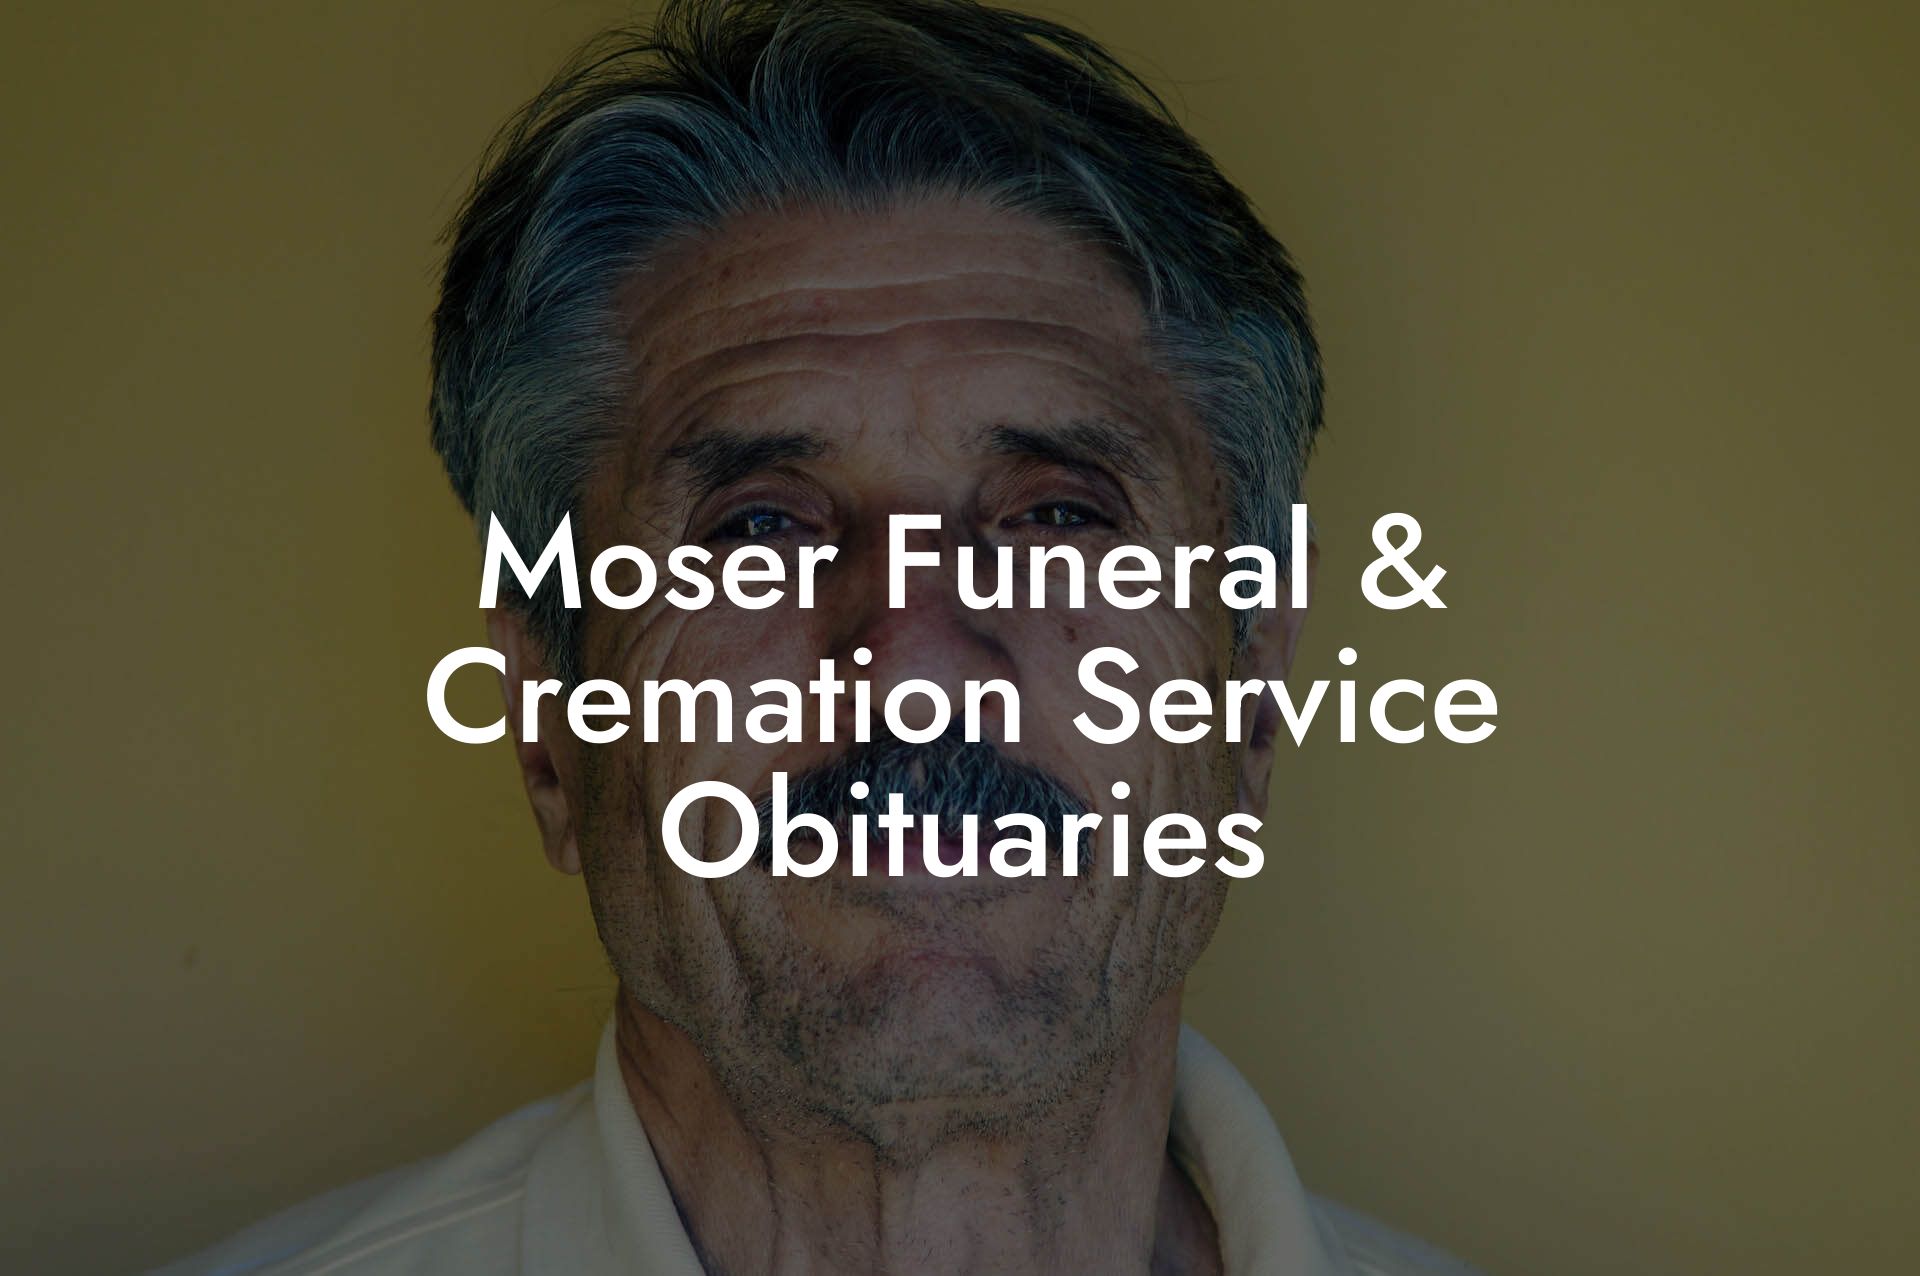 Moser Funeral & Cremation Service Obituaries